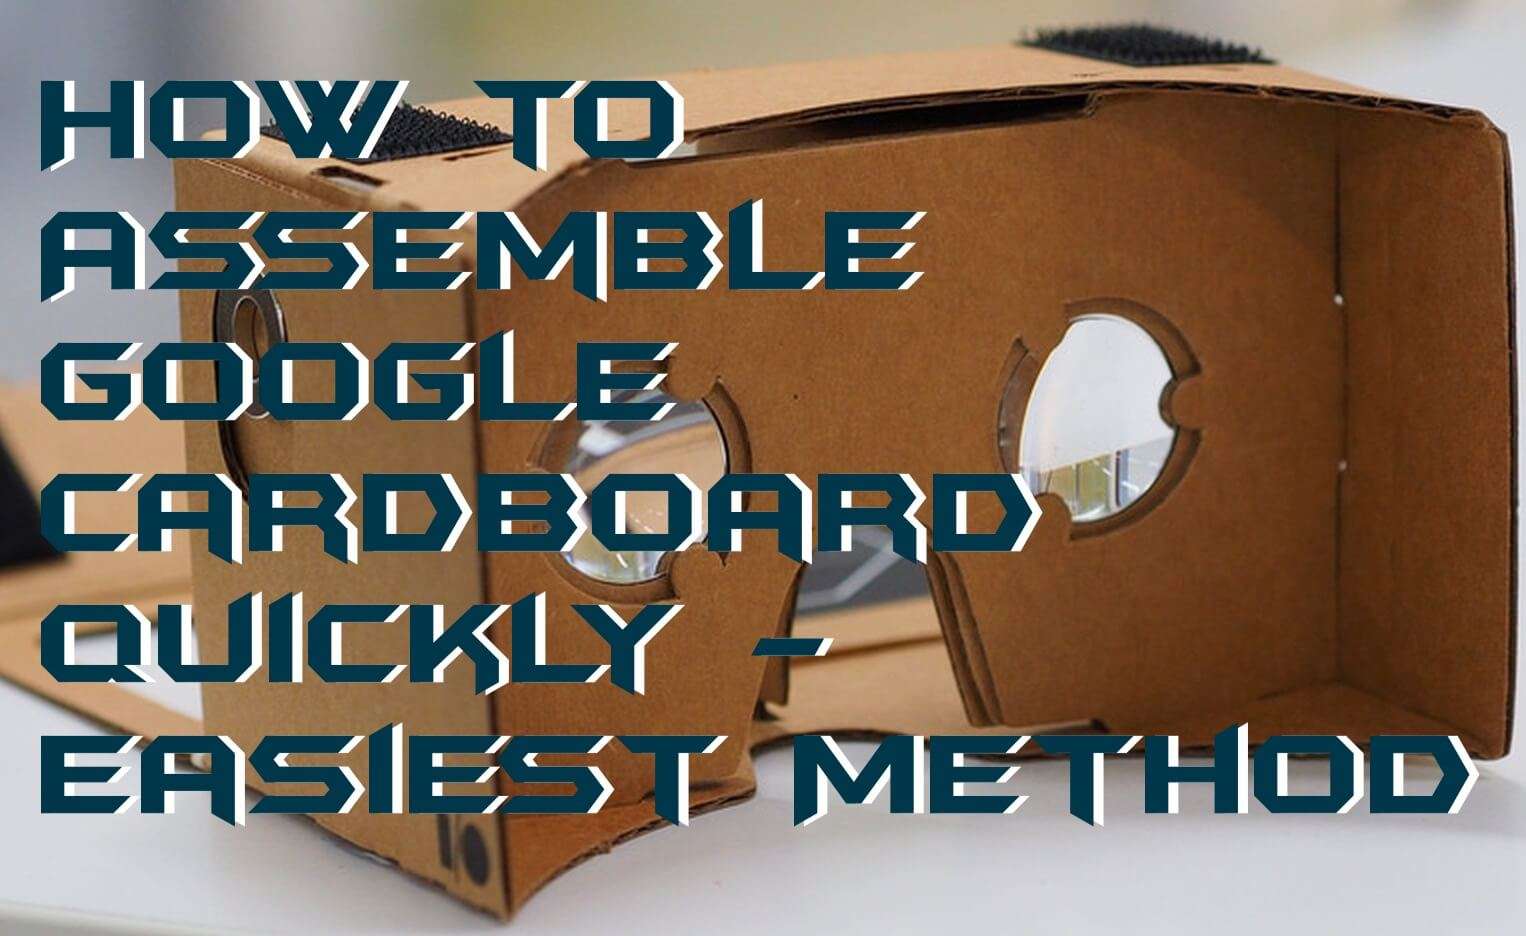 How to Assemble Google Cardboard Quickly - Easiest Method